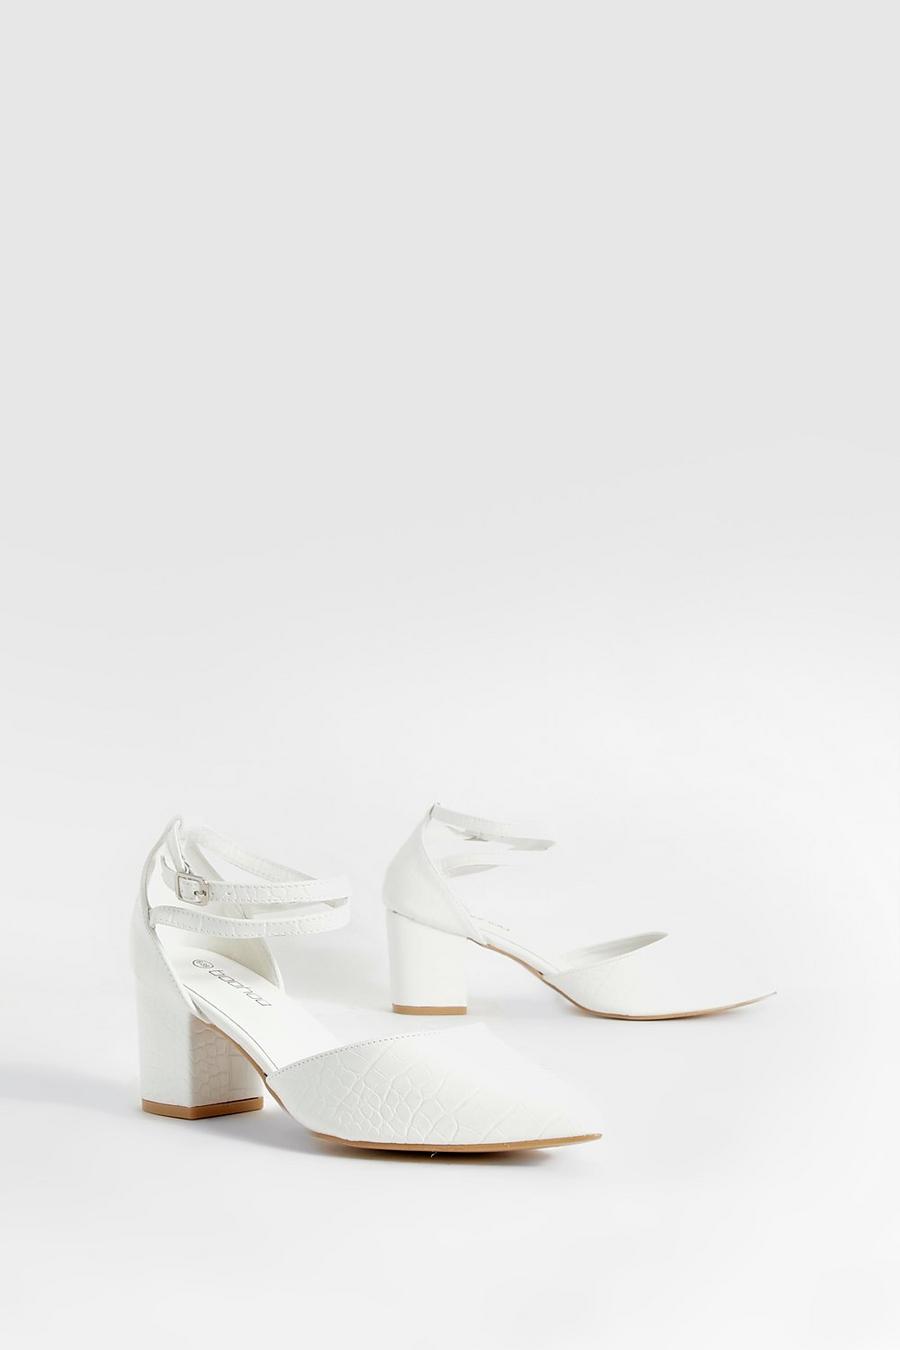 White Wide Fit Croc Heeled Pointed Ballets